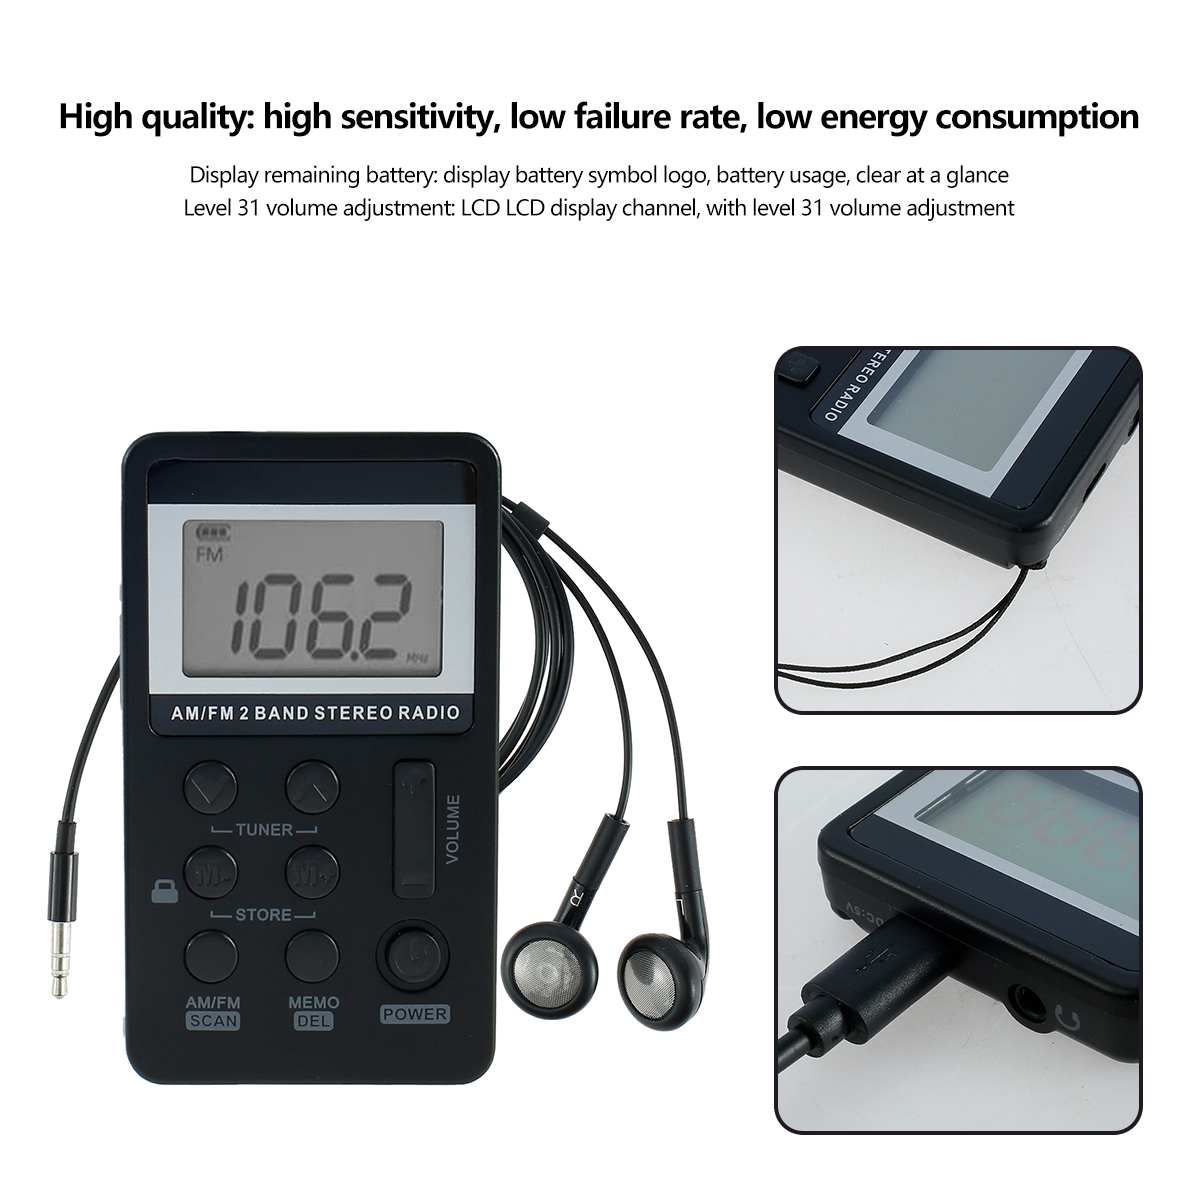 Portable AM/FM Radio, Black, Rechargeable Walkman Radio with LCD Display for Jogging - image 2 of 9